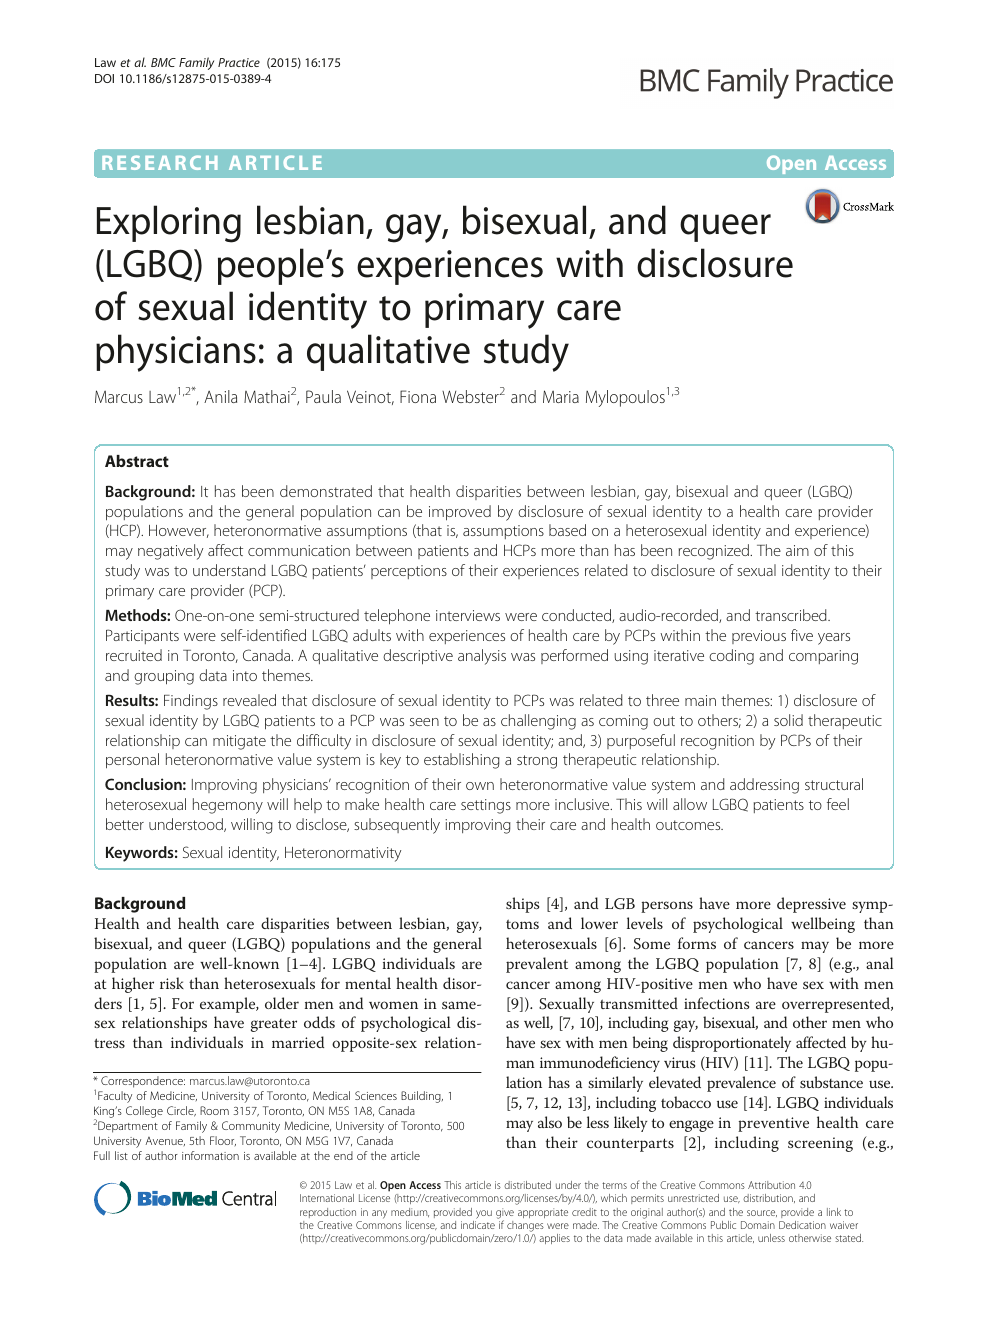 Exploring lesbian, gay, bisexual, and queer (LGBQ) peoples experiences with disclosure of sexual identity to primary care physicians a qualitative study image